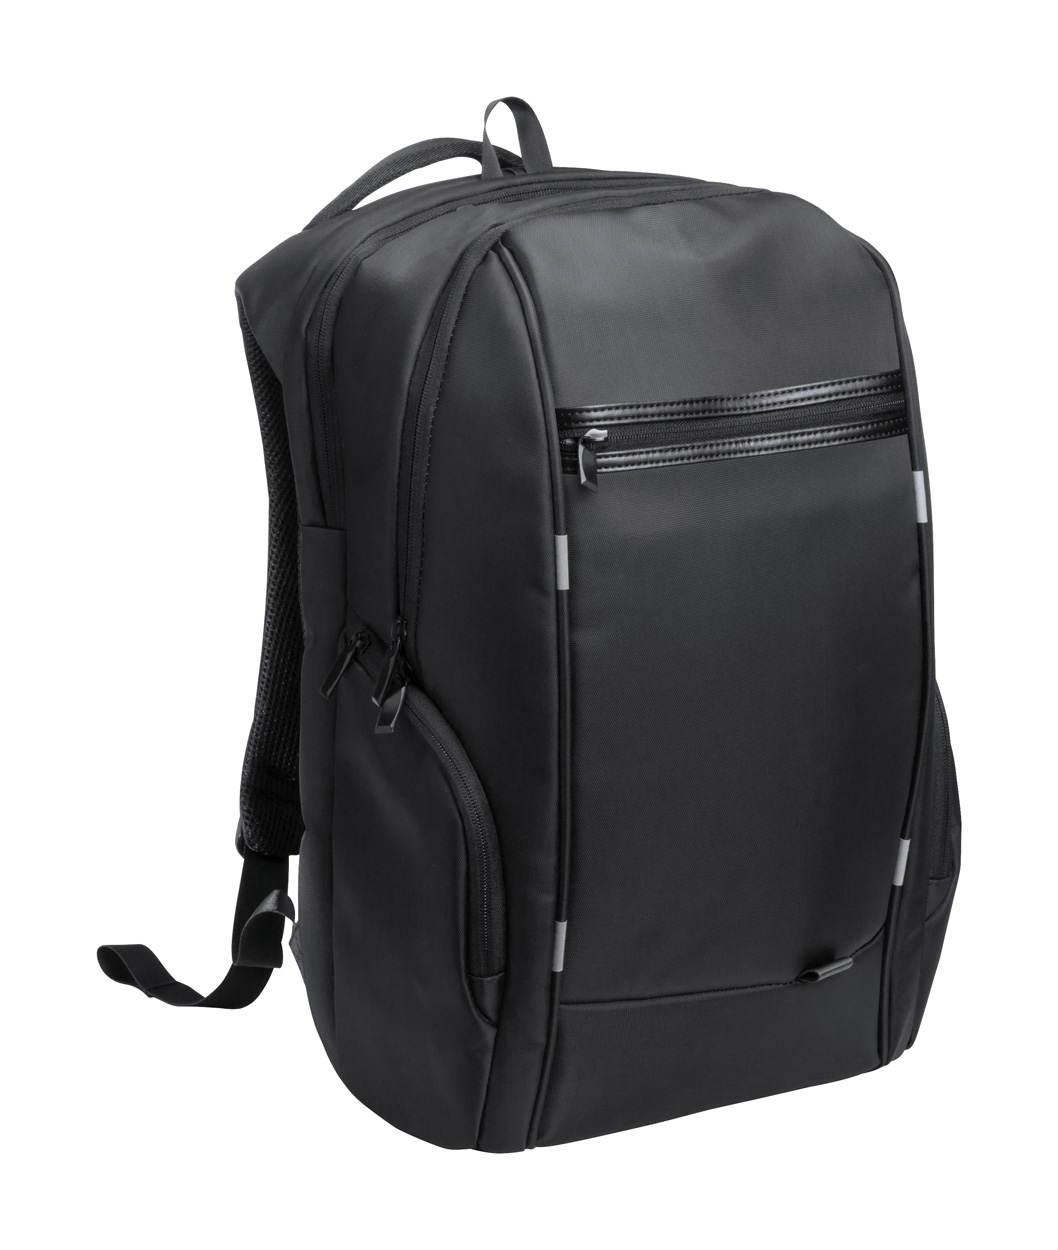 Waterproof backpack ZIRCAN with laptop compartment